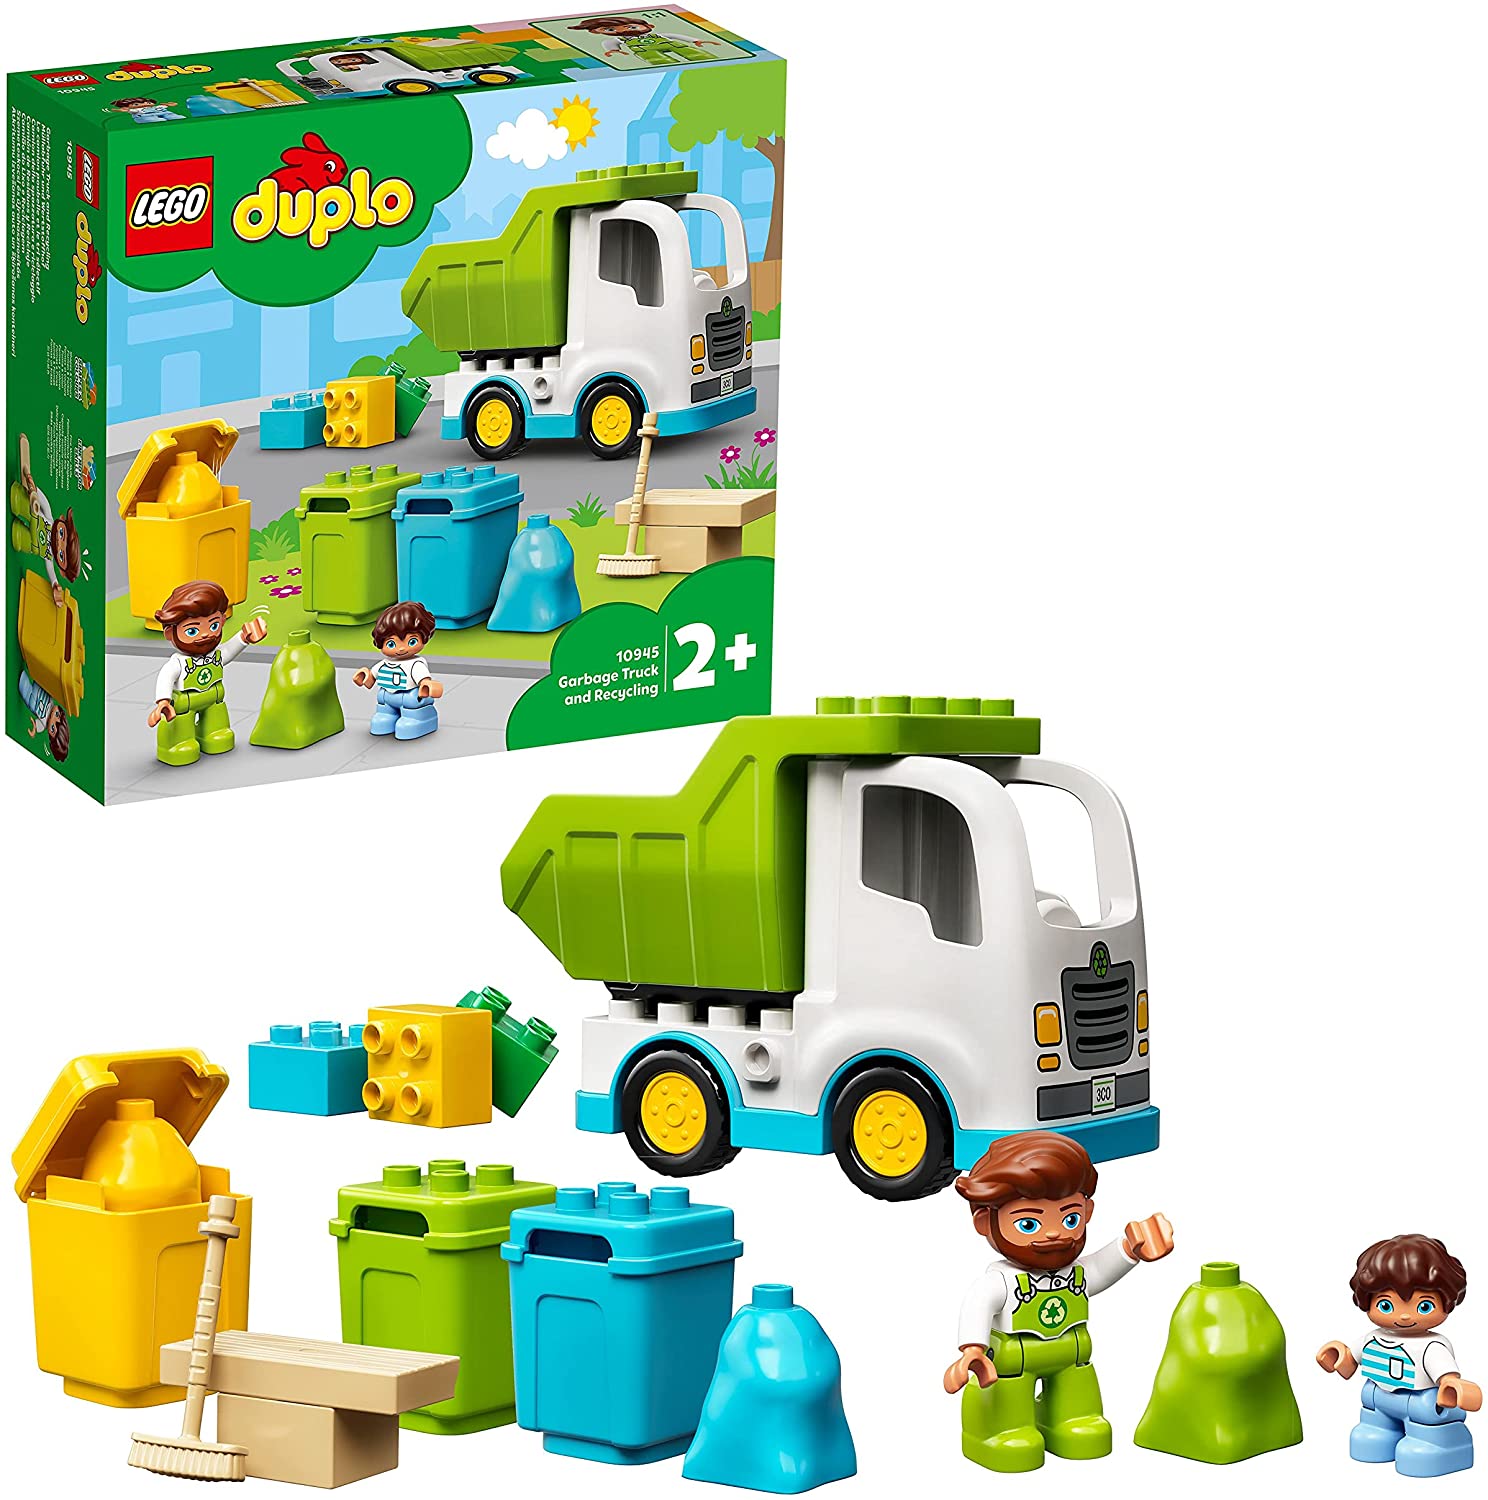 LEGO 10945 Duplo Waste Recycling and Recycling Yard, Rubbish Car Toy, Educa